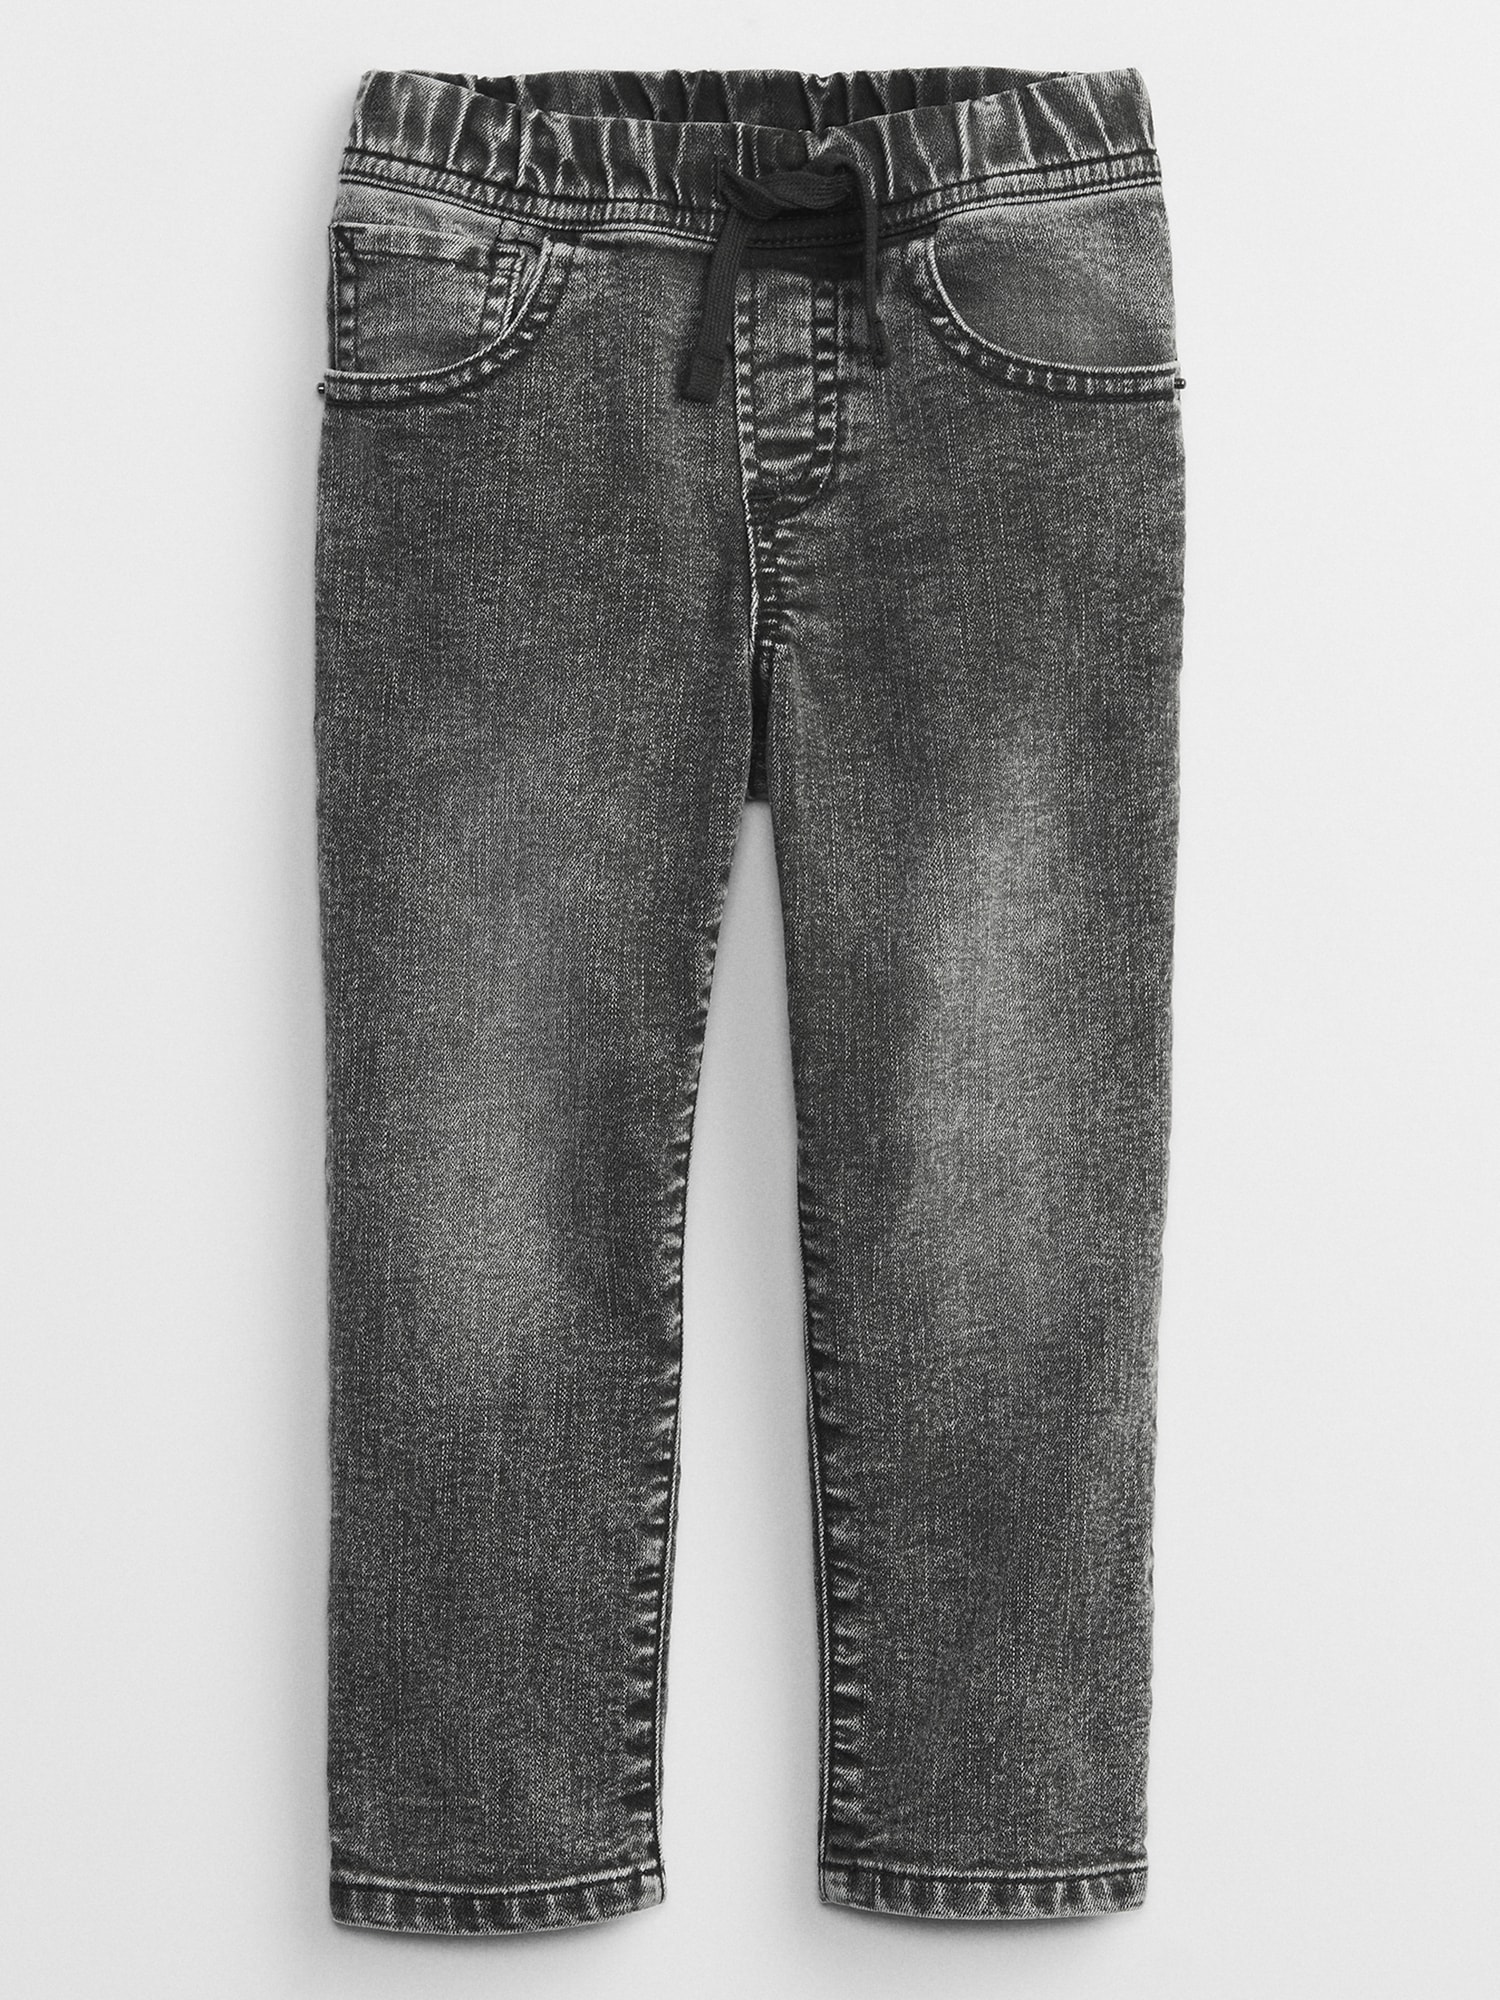 Faded Jeans | Gap Factory